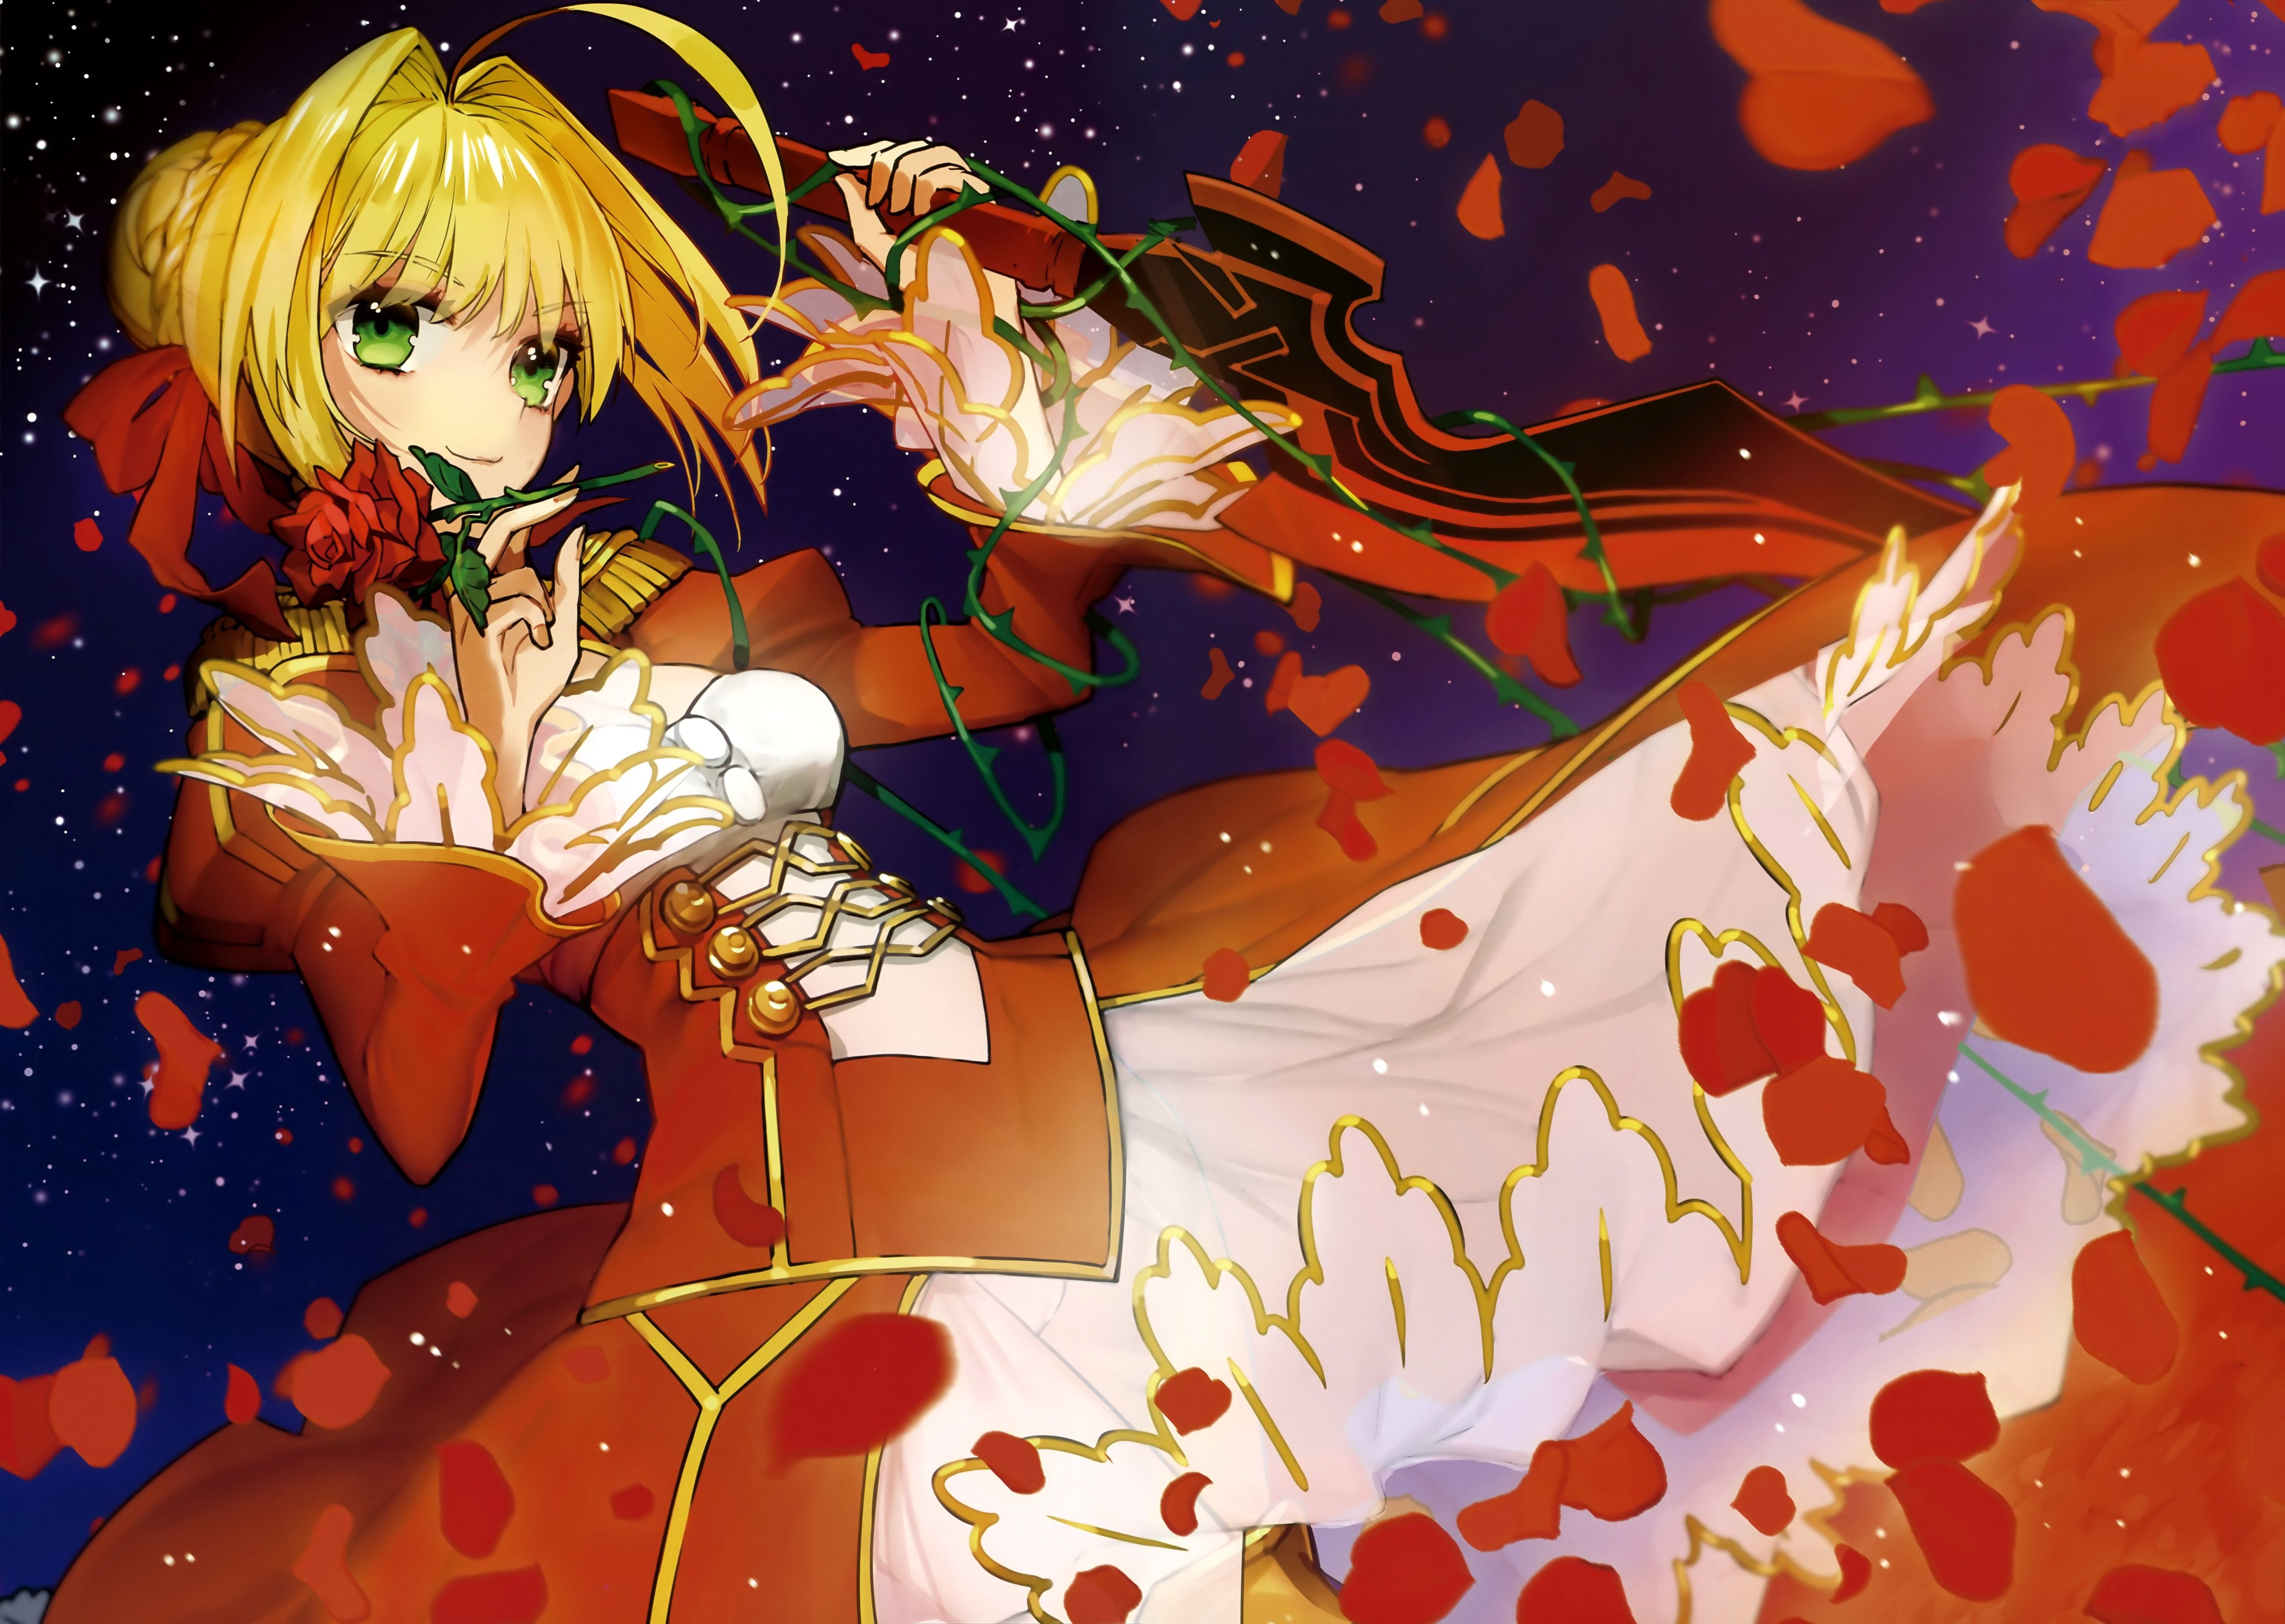 Saber Anime Wallpapers - Wallpaper Cave